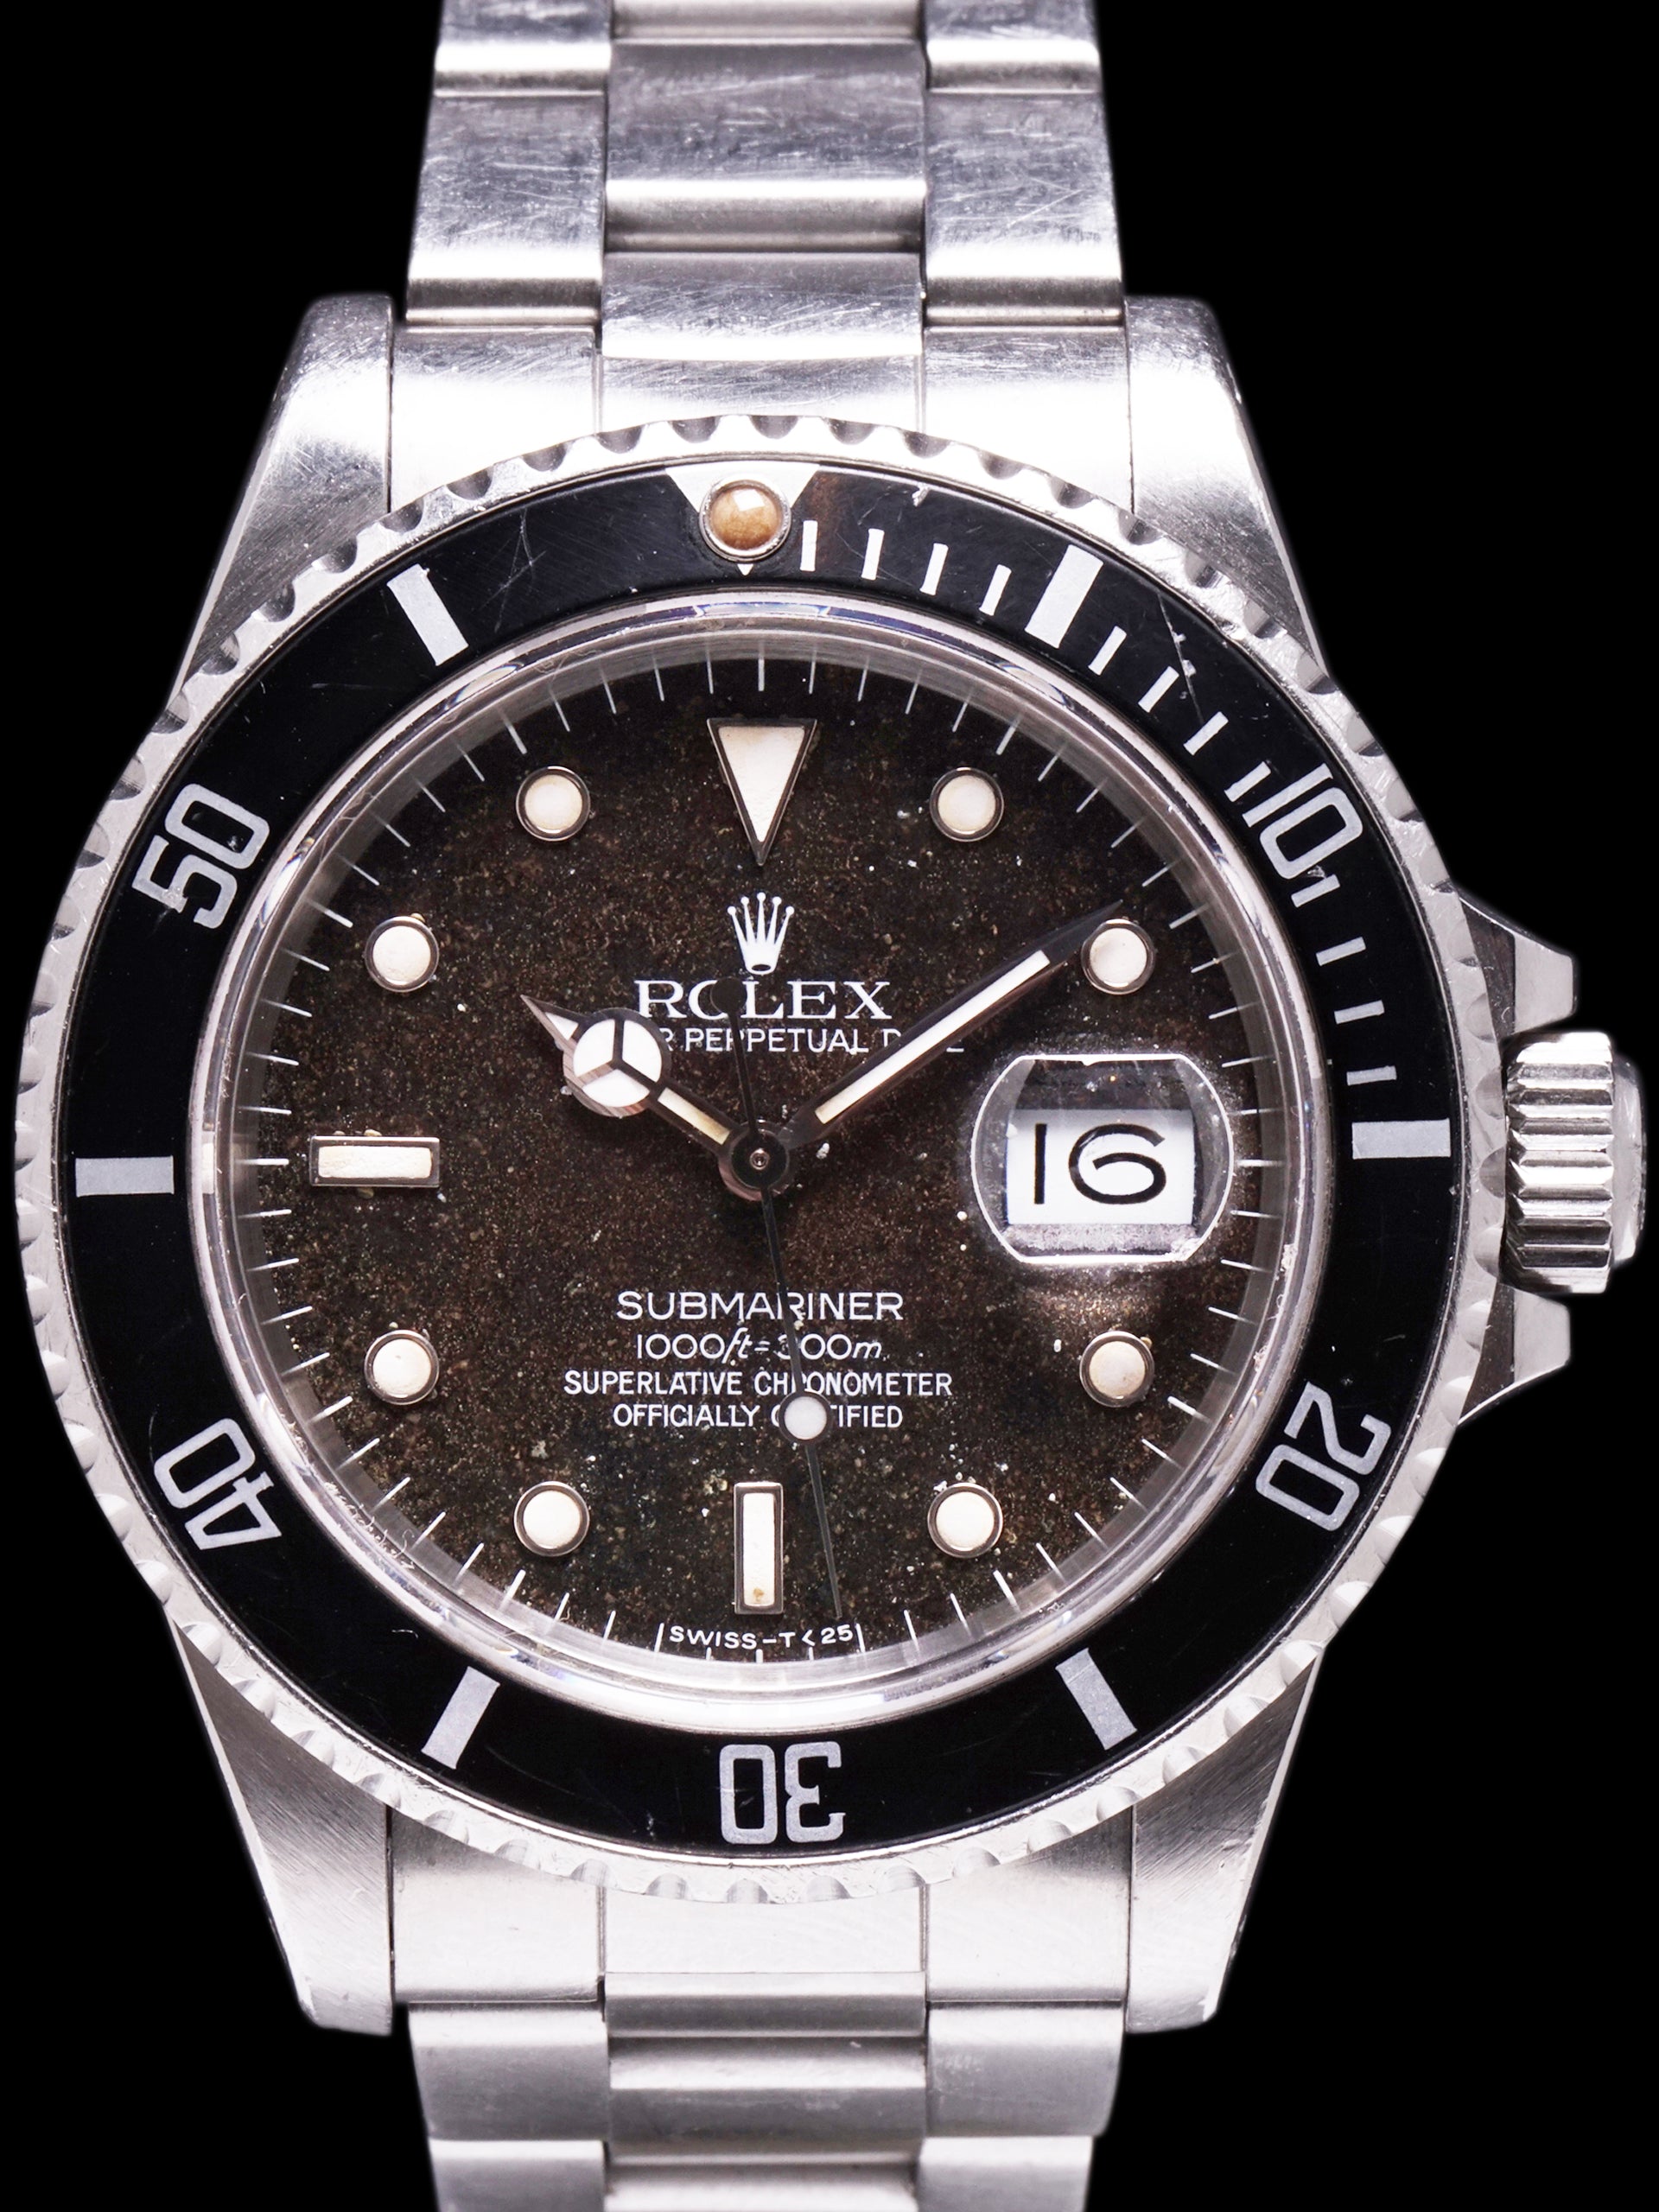 1987 Rolex Submariner (Ref.16800A) Rare Transitional Model "Tropical" w/ Box and Papers